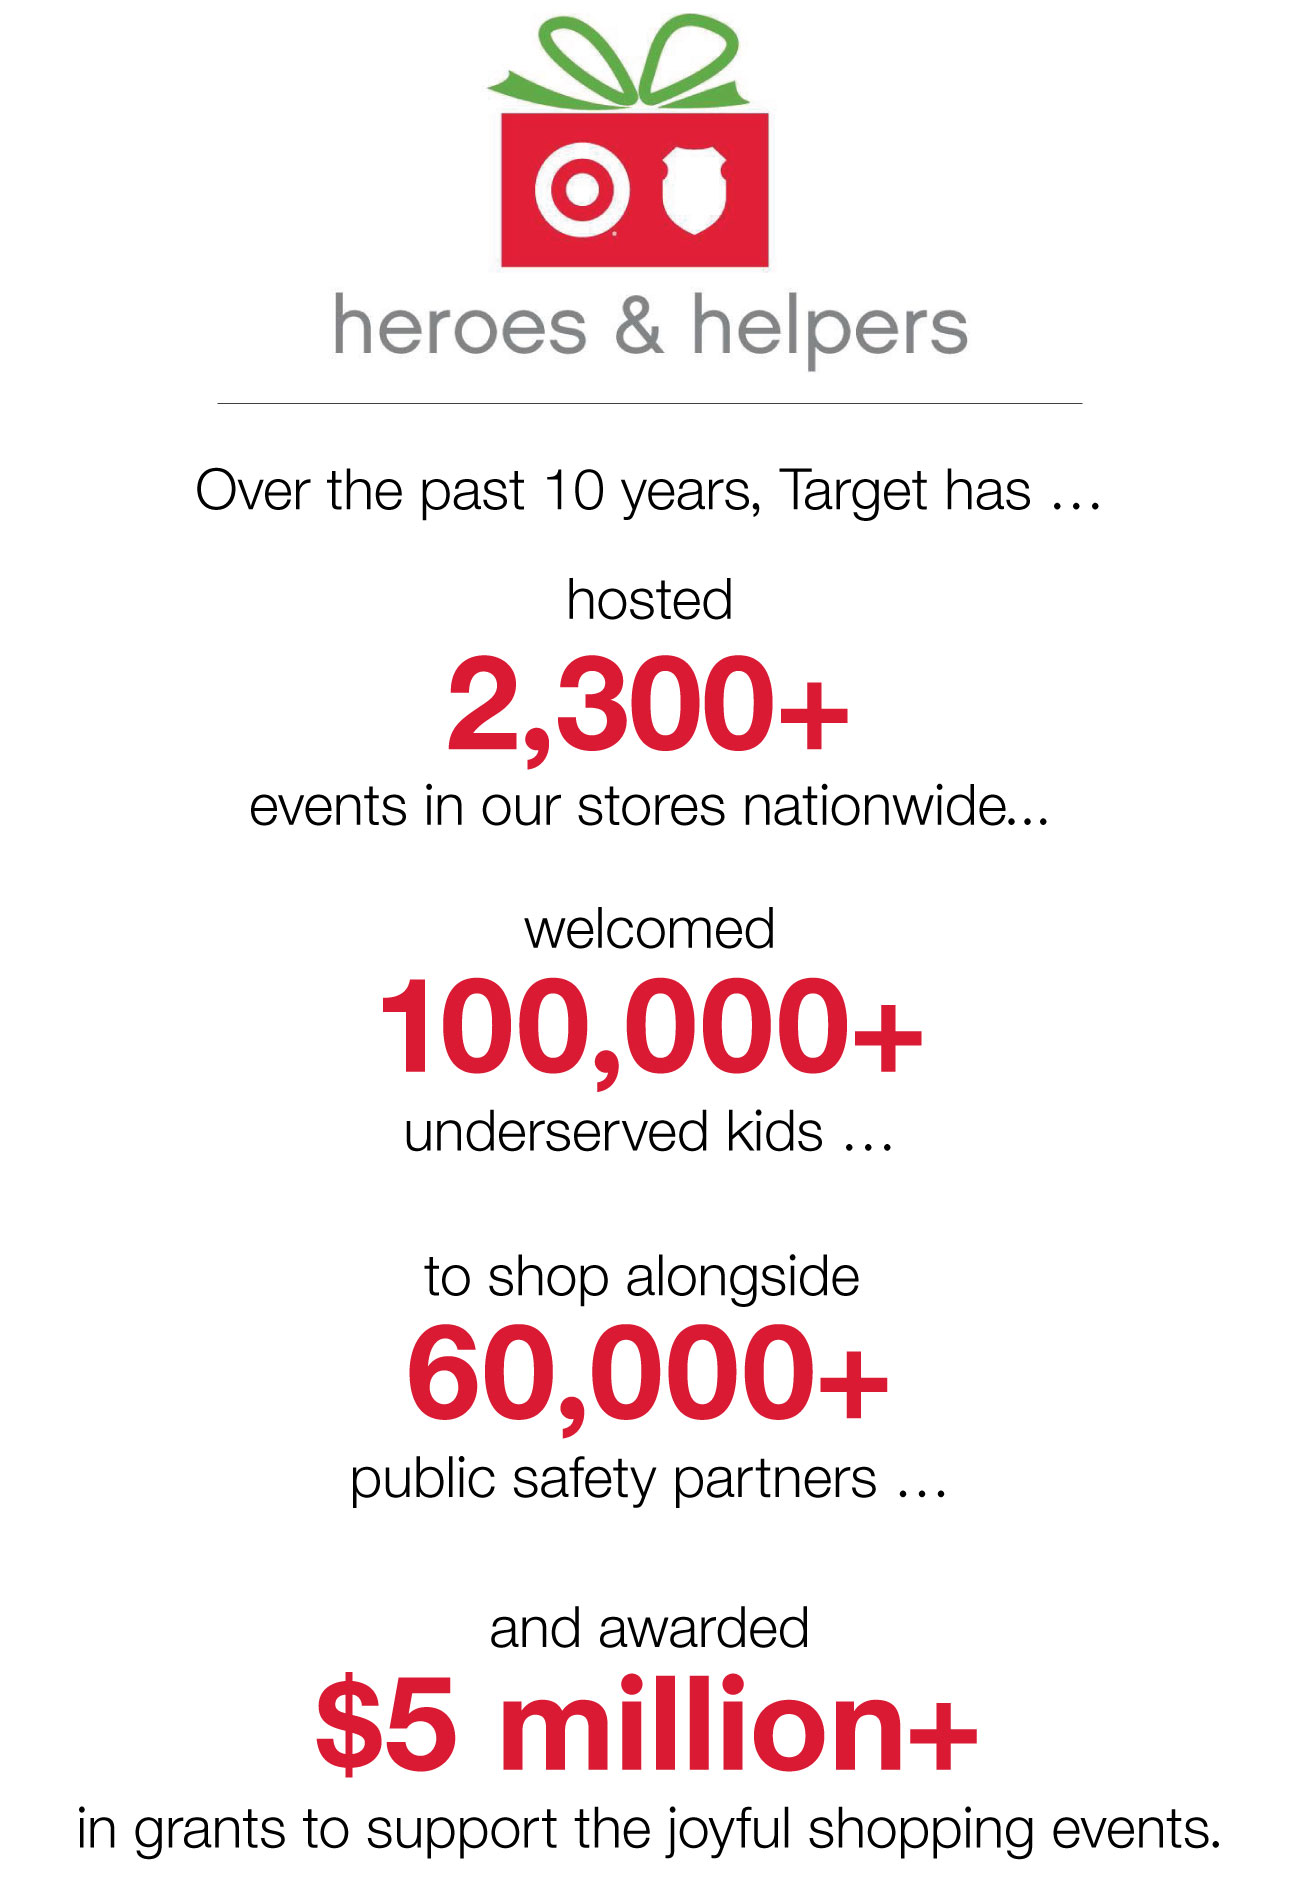 An infographic featuring the red and green Heroes & Helpers logo and gray and red text on a white background